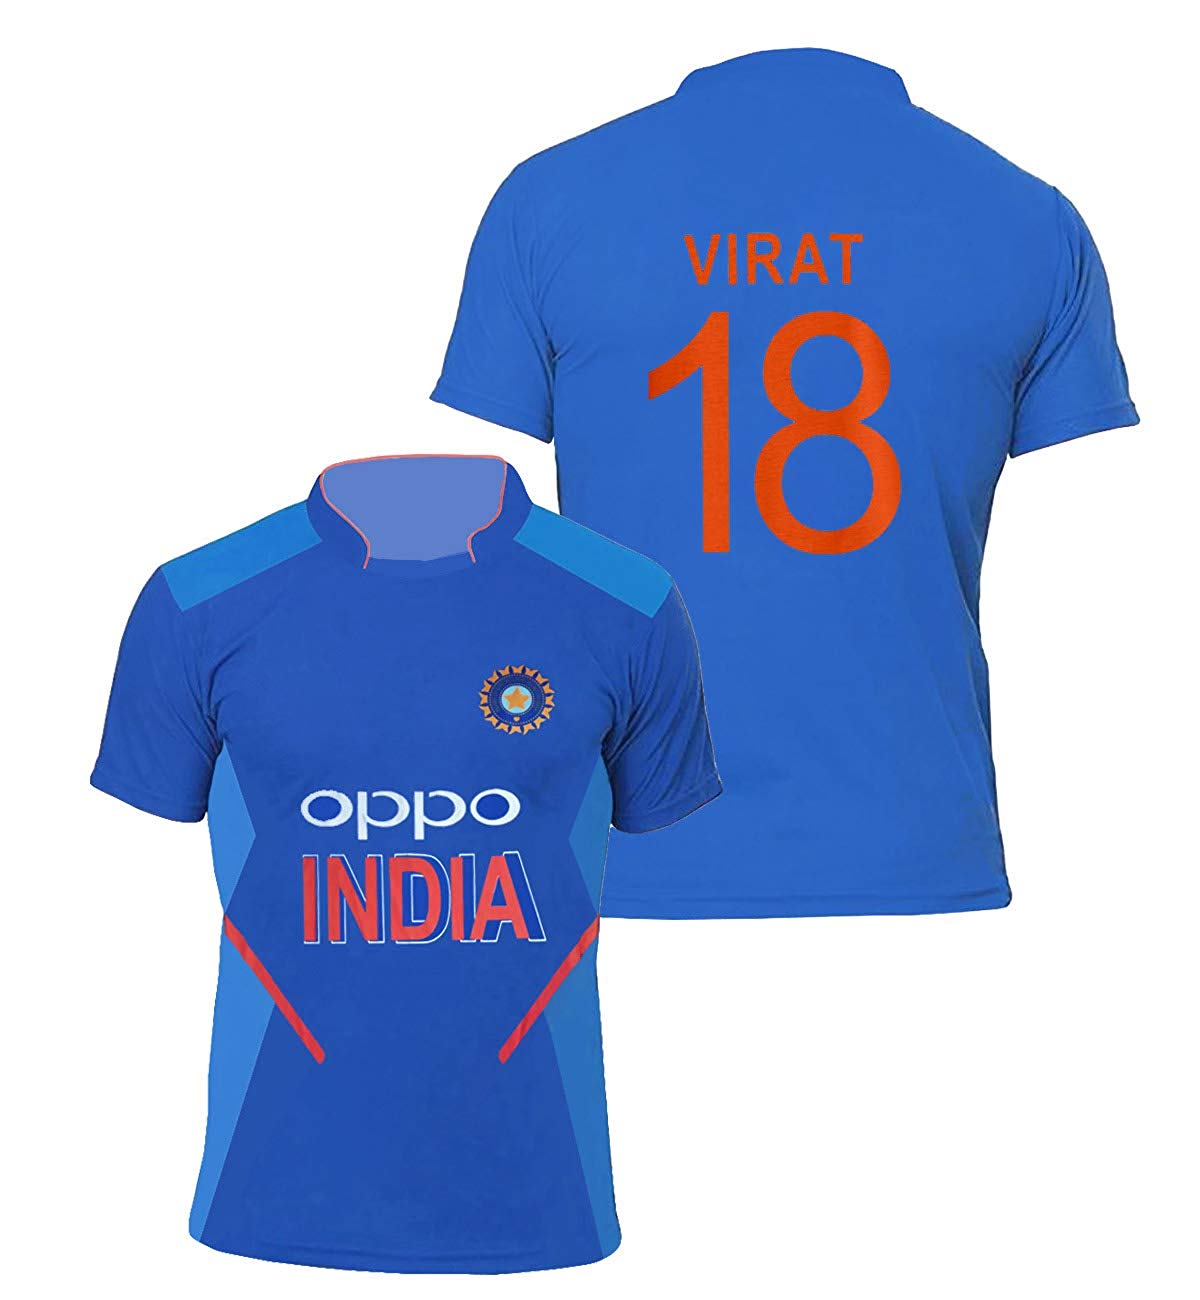 Buy Cricket Jersey 2020 For Virat 18 Online @ ₹350 from ShopClues